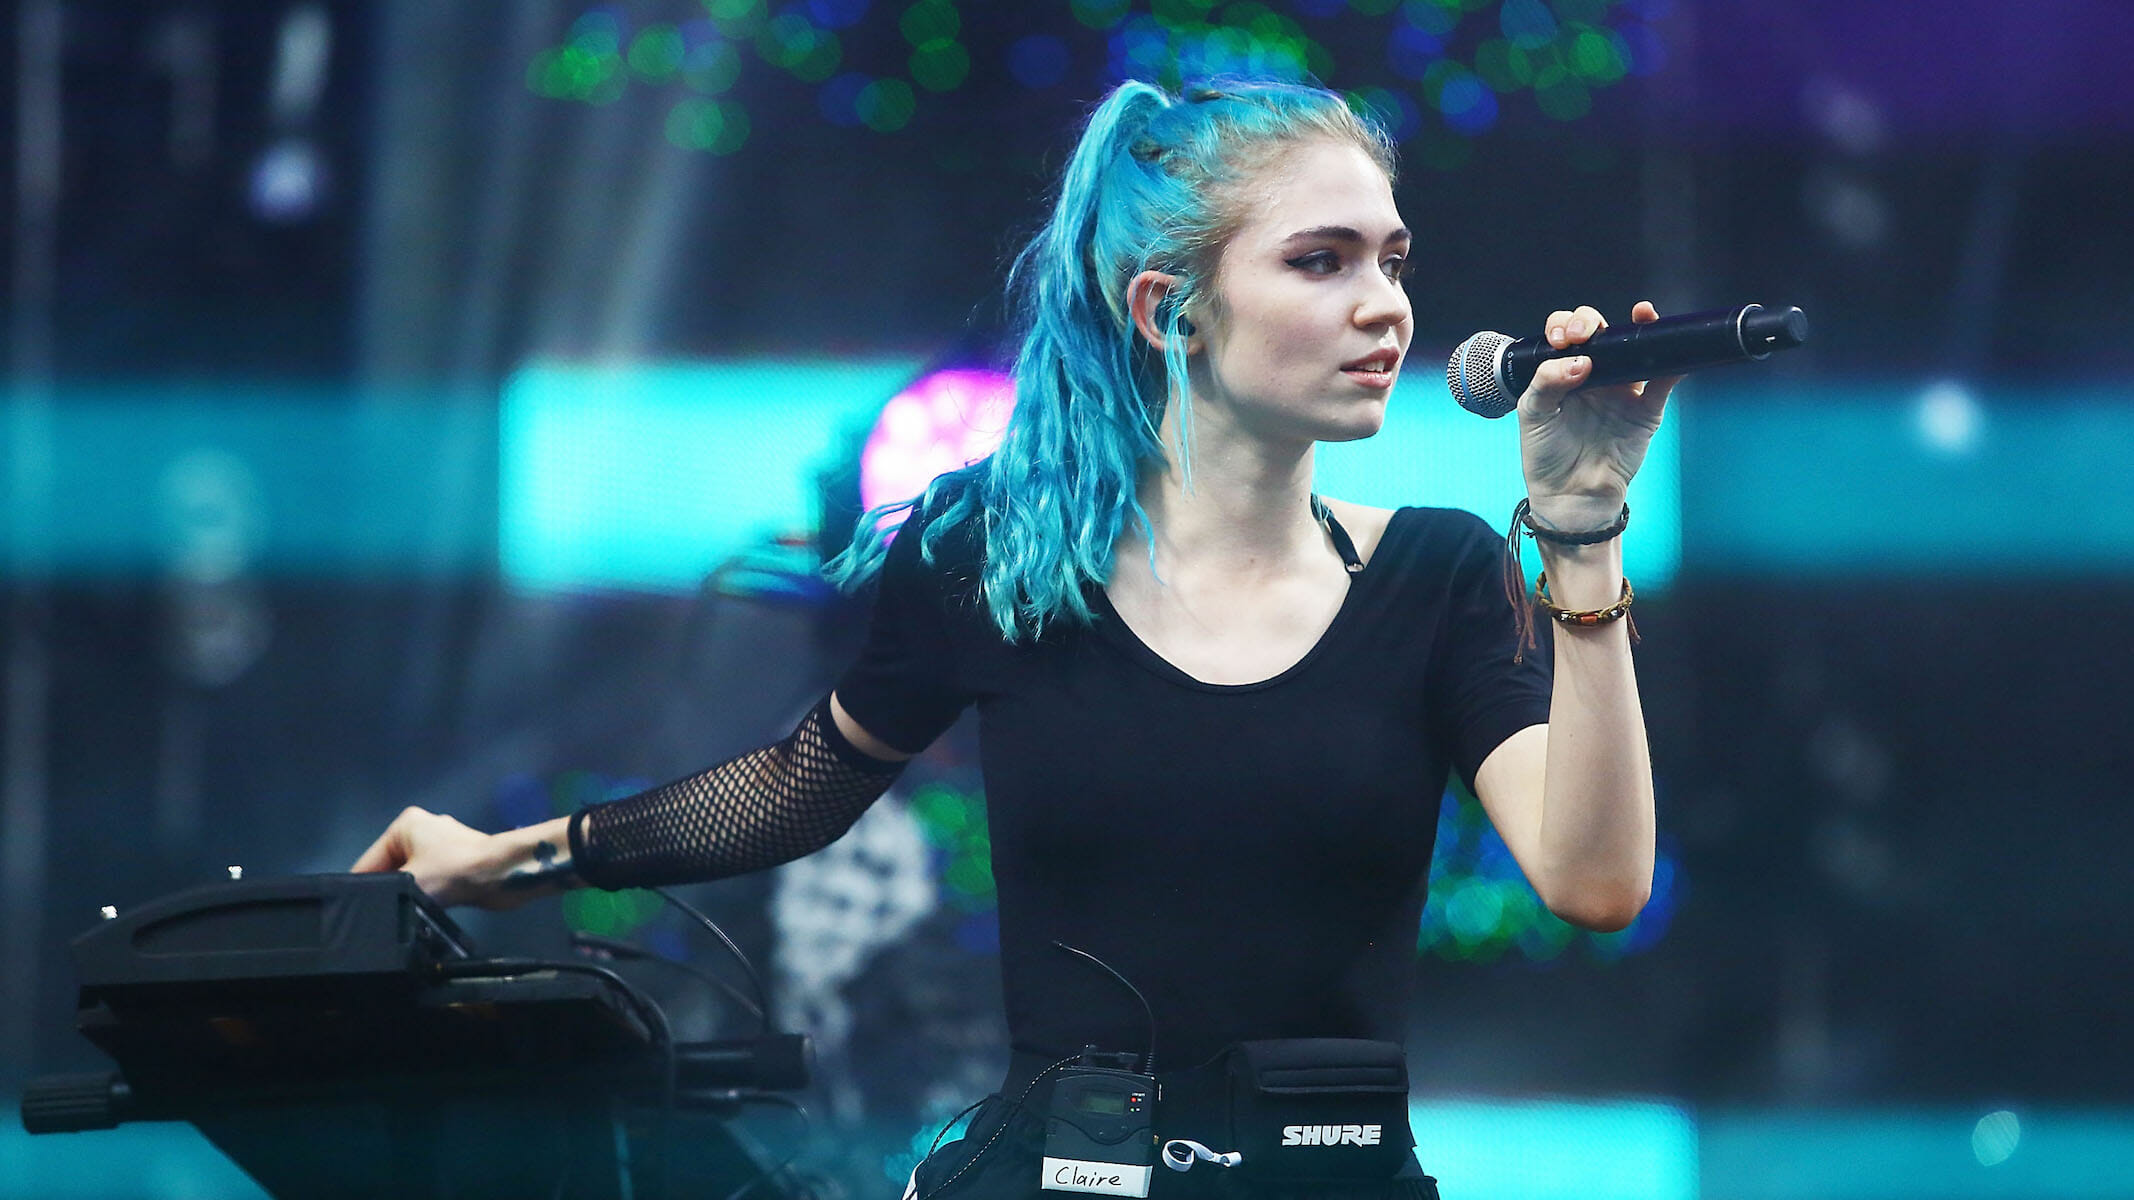 From the Vault: Hear a Young Grimes Perform Visions Demos in 2011